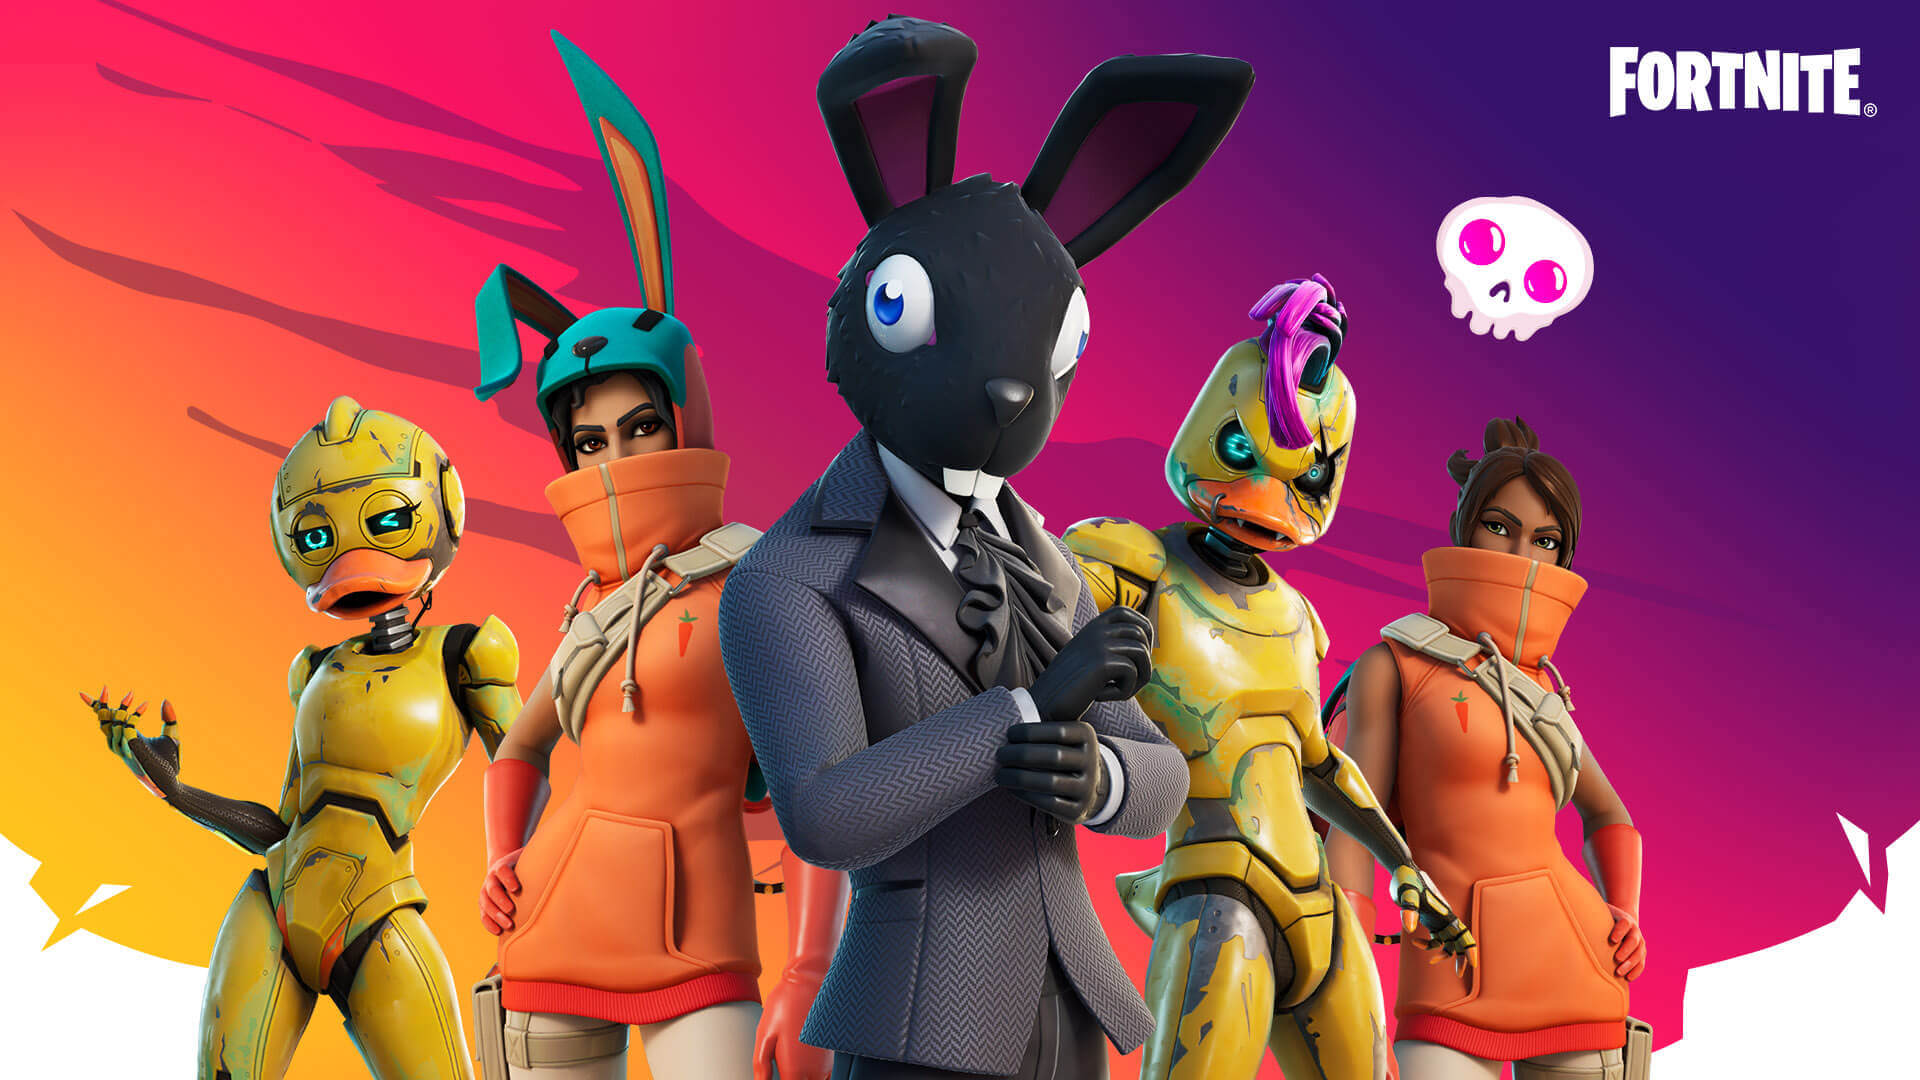 Fortnite Spring Breakout Event Coming Soon Duos Tournament Free Skin New Items